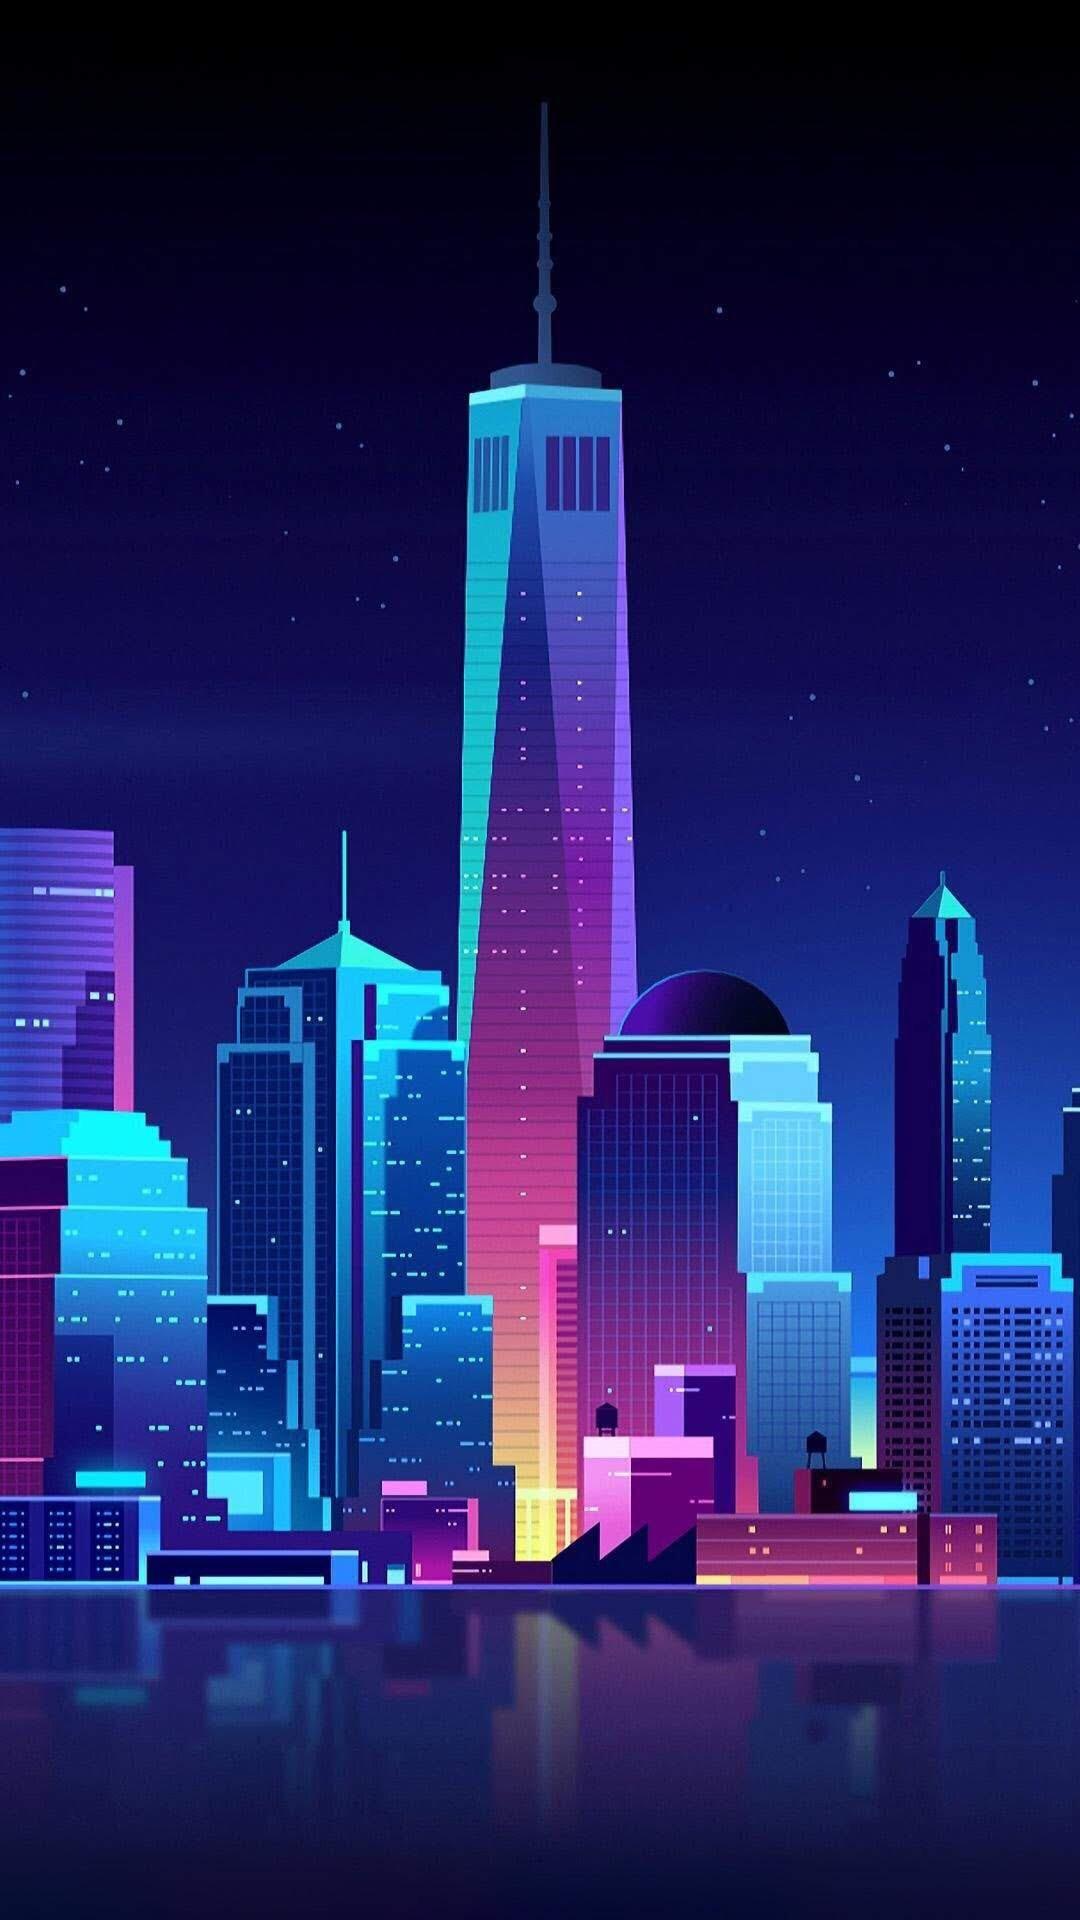 Late City Lights. Wallpaper (for cell phones) in 2019